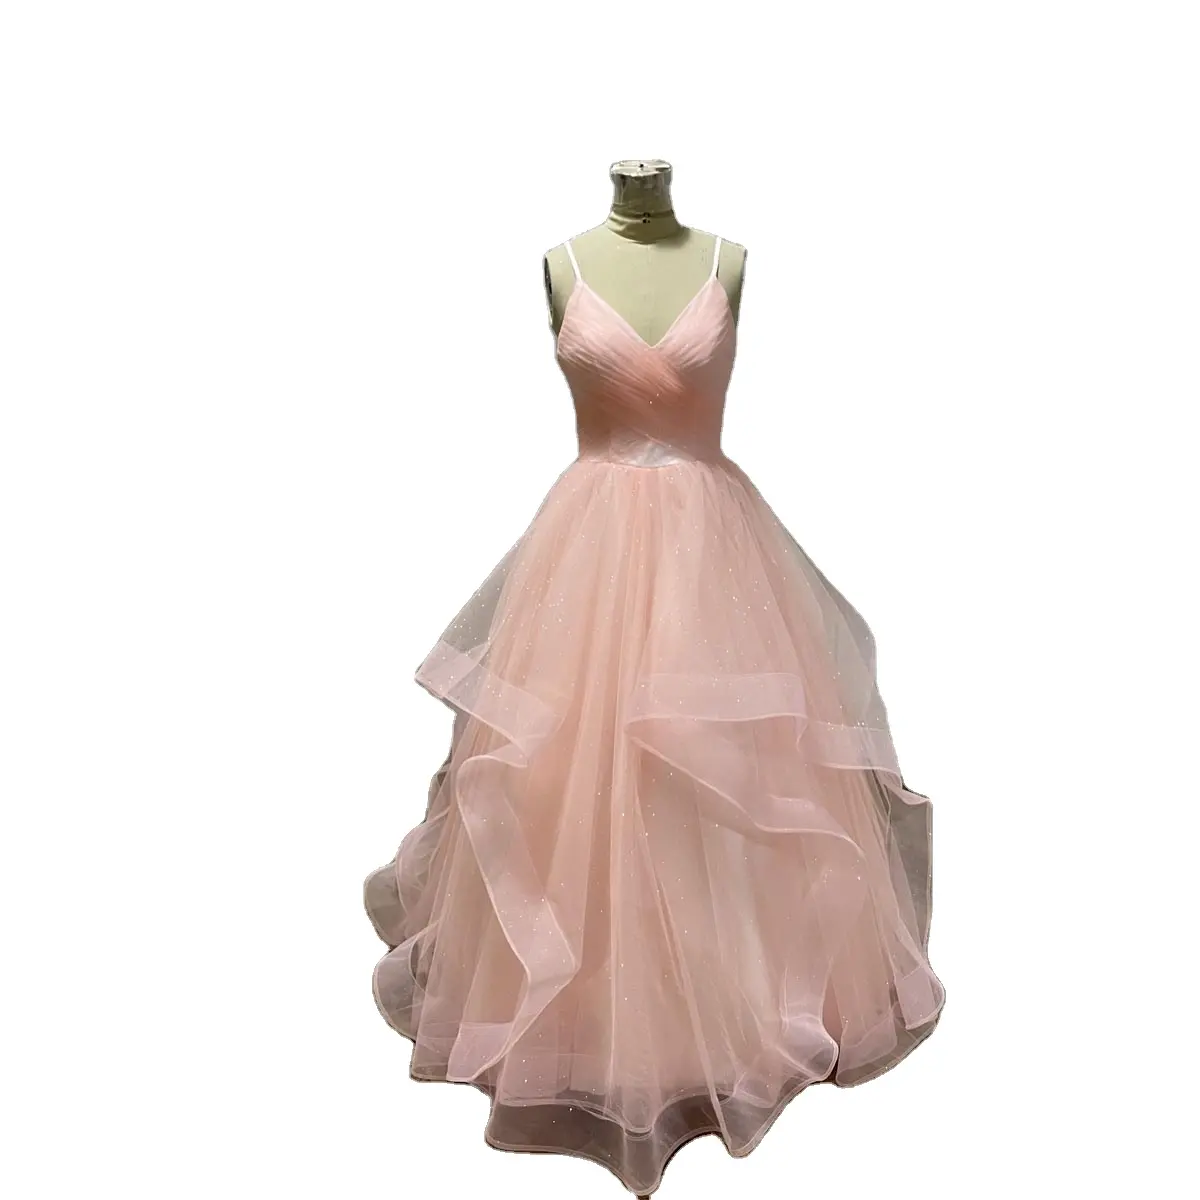 Manufacturer of bridal gowns ruffle sparkly tulle V neck teenager girl party dress birthday wedding dress girl dancing dresses